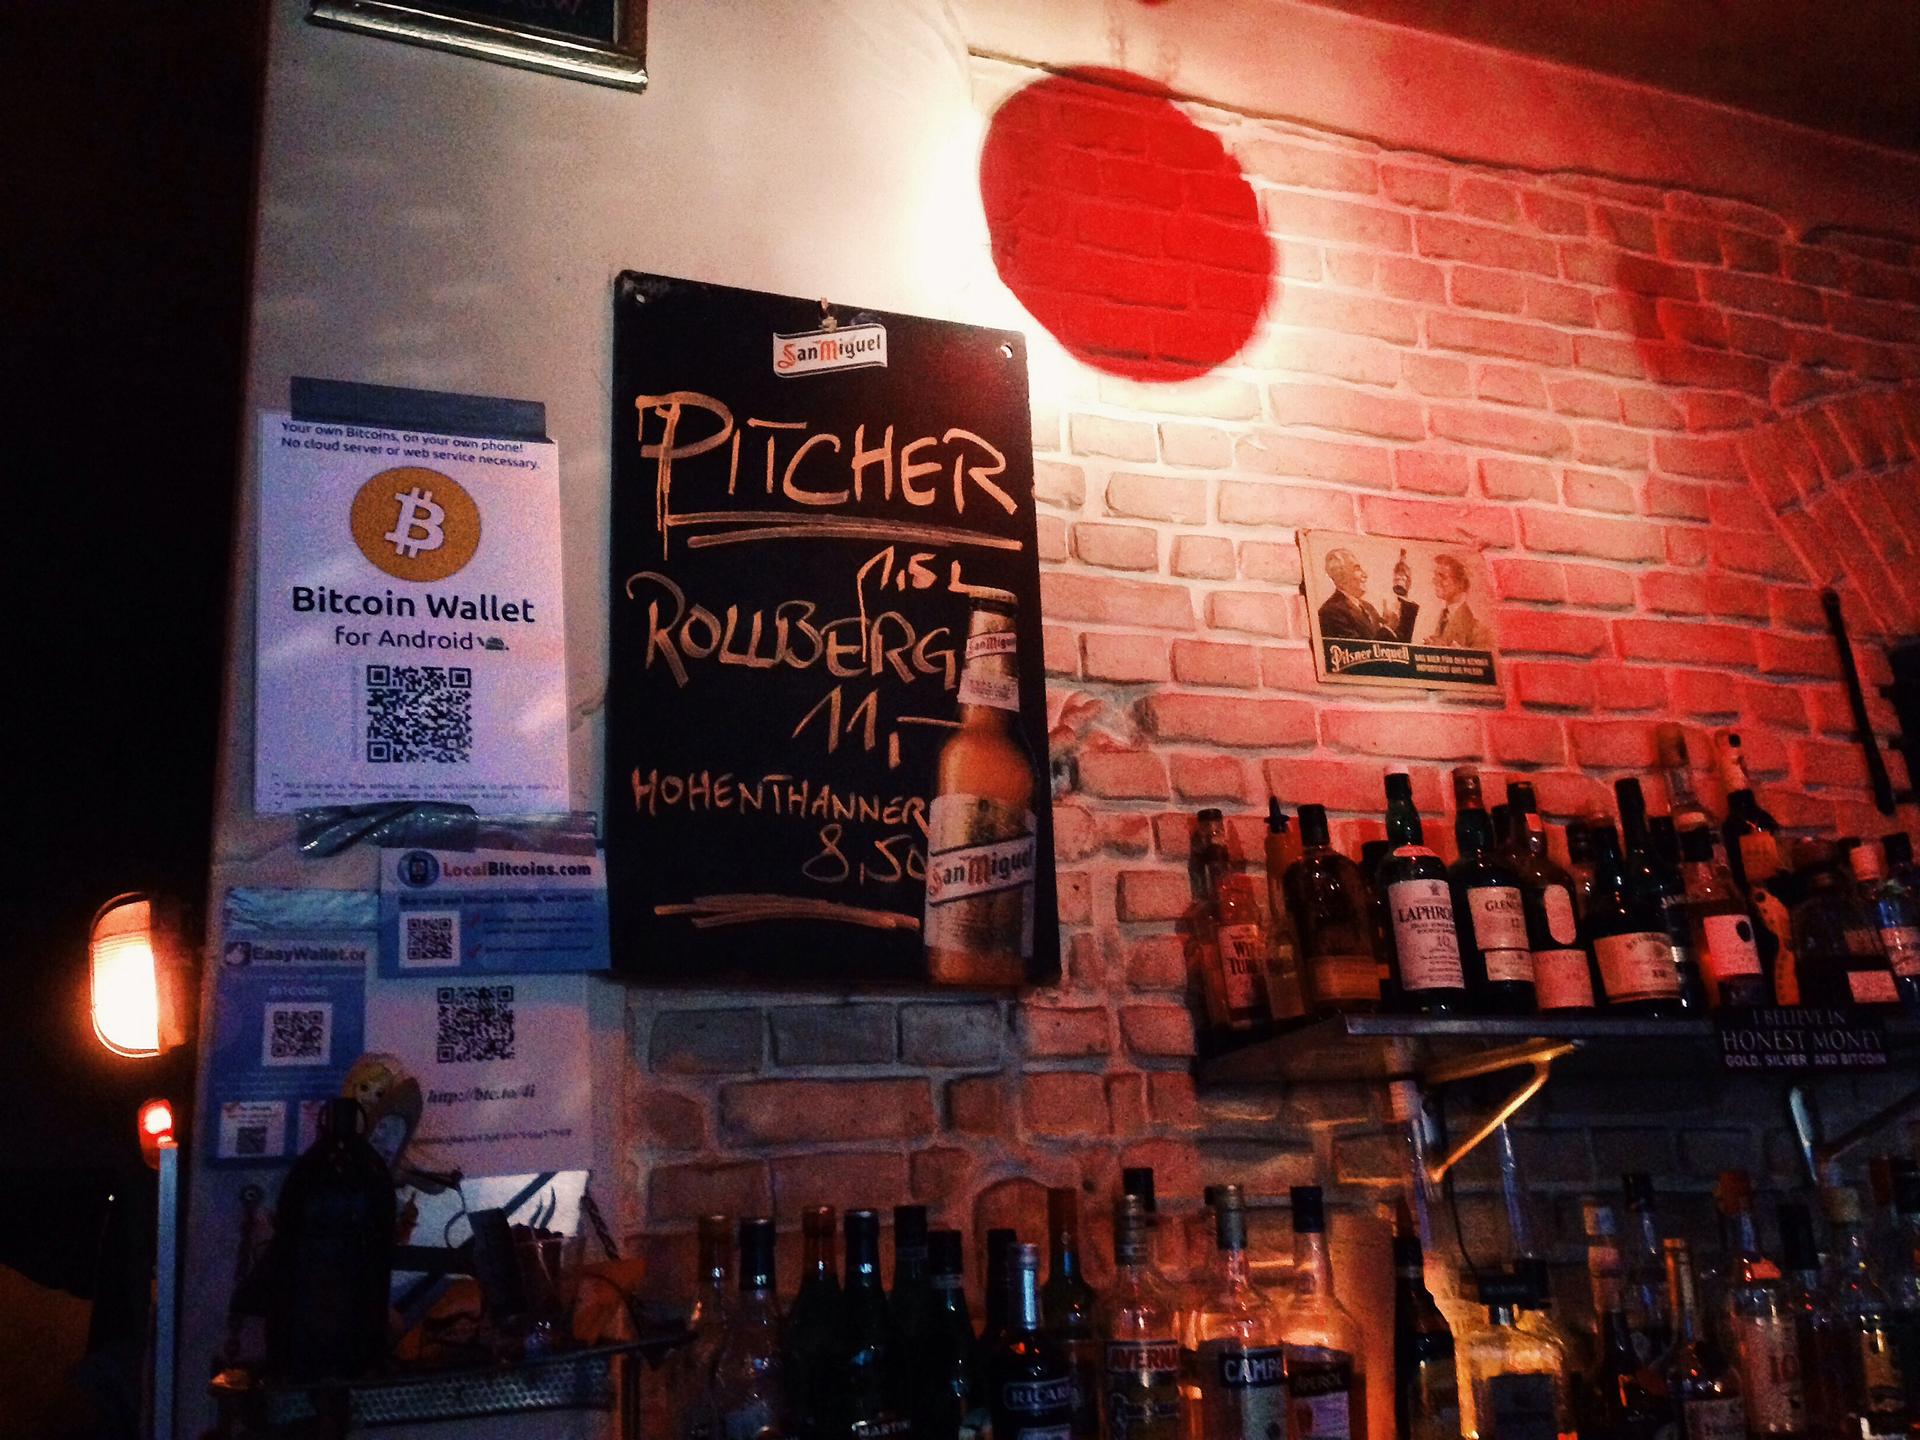 Behind the bar at Room 77 a sign announces that clients can pay for their beers in Bitcoin.